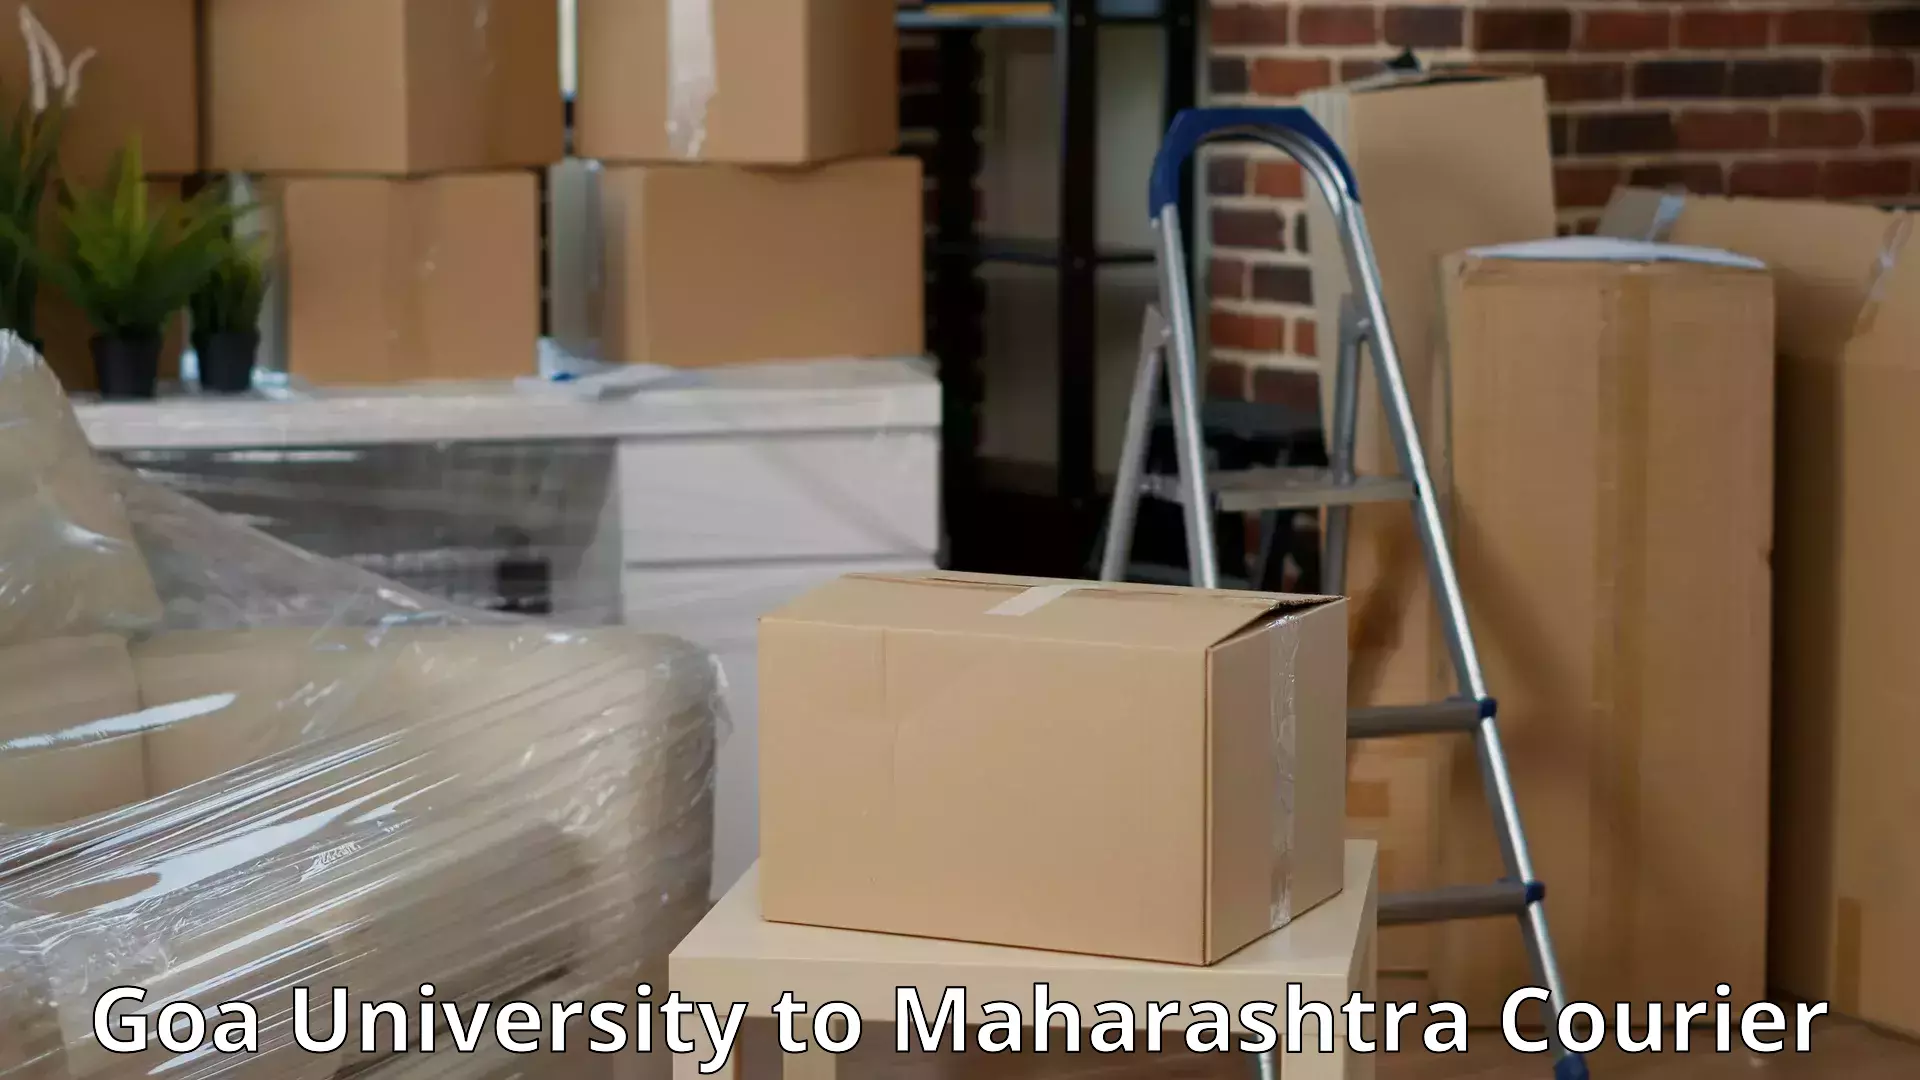 Moving and storage services in Goa University to Jaysingpur